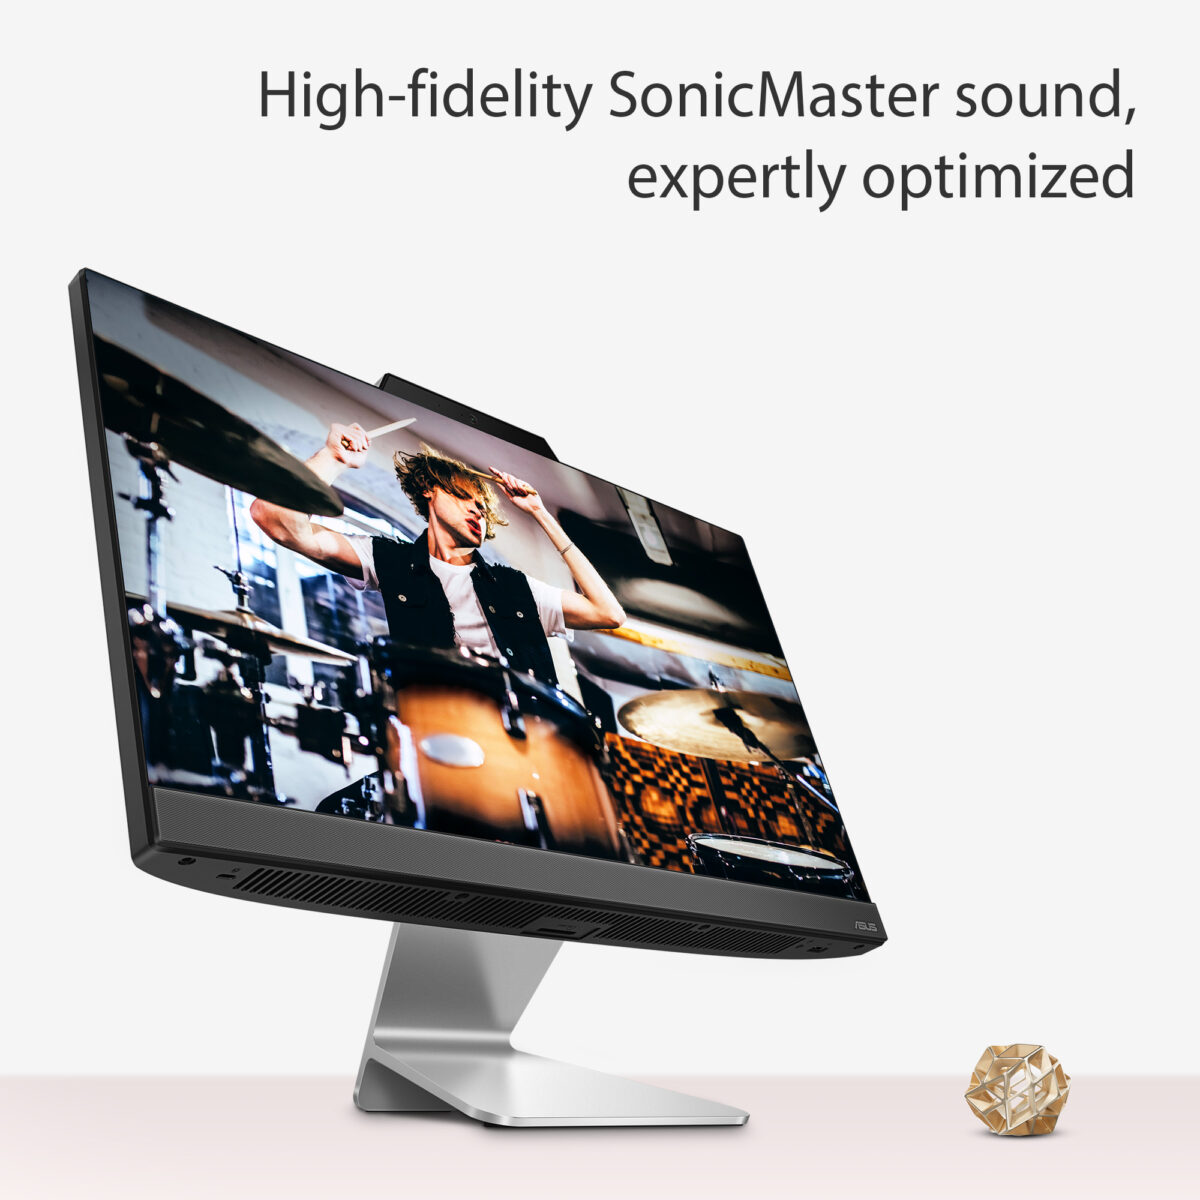 ASUS A3202 A3202WBAK-BA003WS AUDIO High-fidelity SonicMaster sound, expertly optimized ASUS SonicMaster, developed by the ASUS Golden Ear team, empowers ASUS A3202 with quality audio that delivers wider frequency range for clearer vocals and rich, deep bass. SonicMaster is a tailored mix of superior hardware and clever software designed to give you full audio controls for truly immersive sound for movies, music and games.